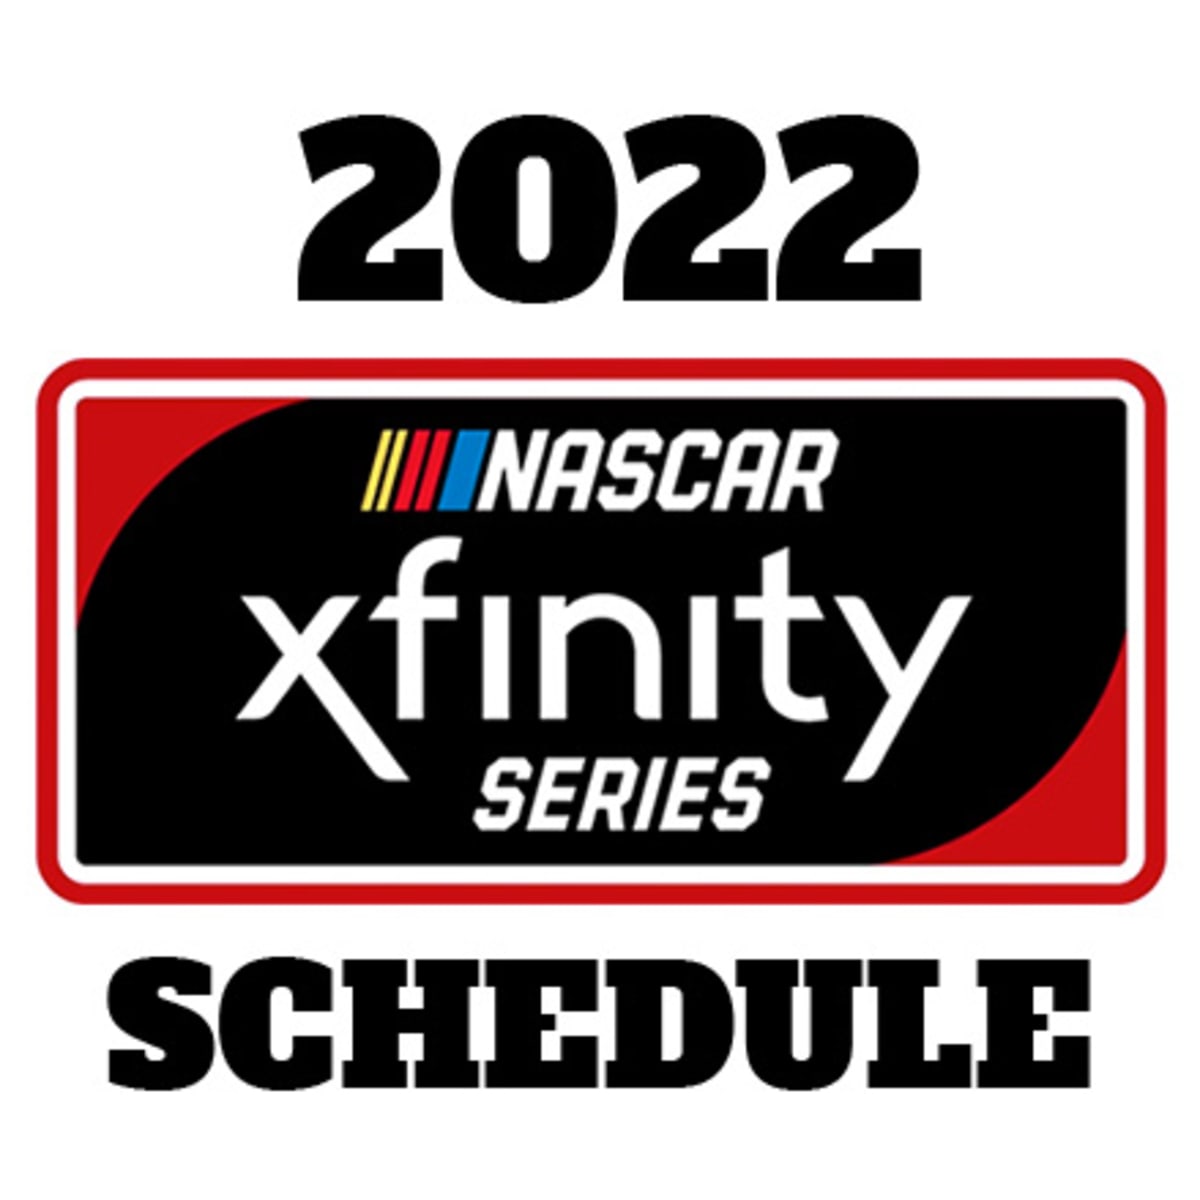 Nascar Xfinity Schedule 2022 2022 Nascar Xfinity Series Schedule - Athlonsports.com | Expert  Predictions, Picks, And Previews